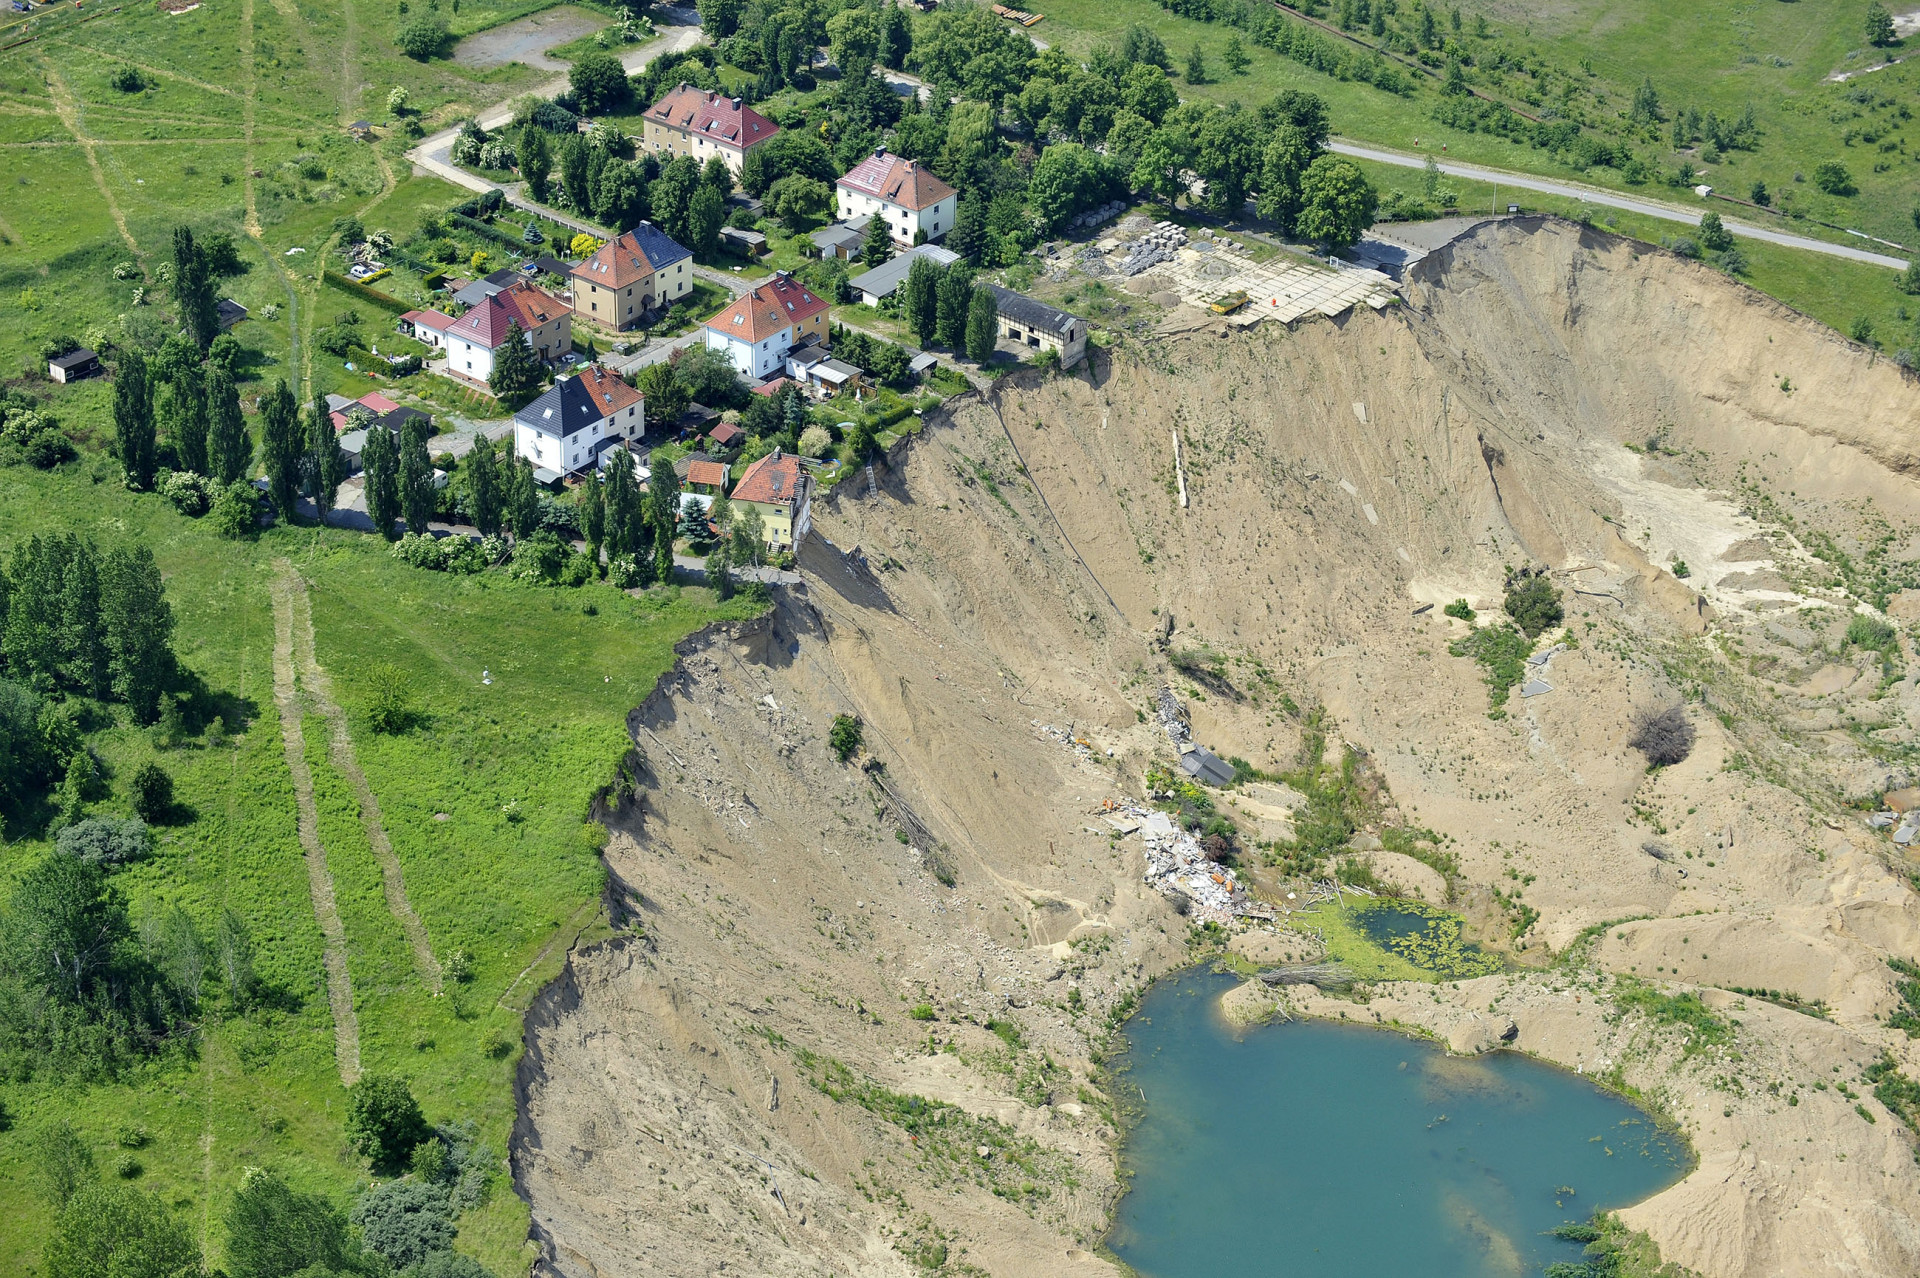 Houses near a collapsed hill with no vegetation, leading down to a small lake.